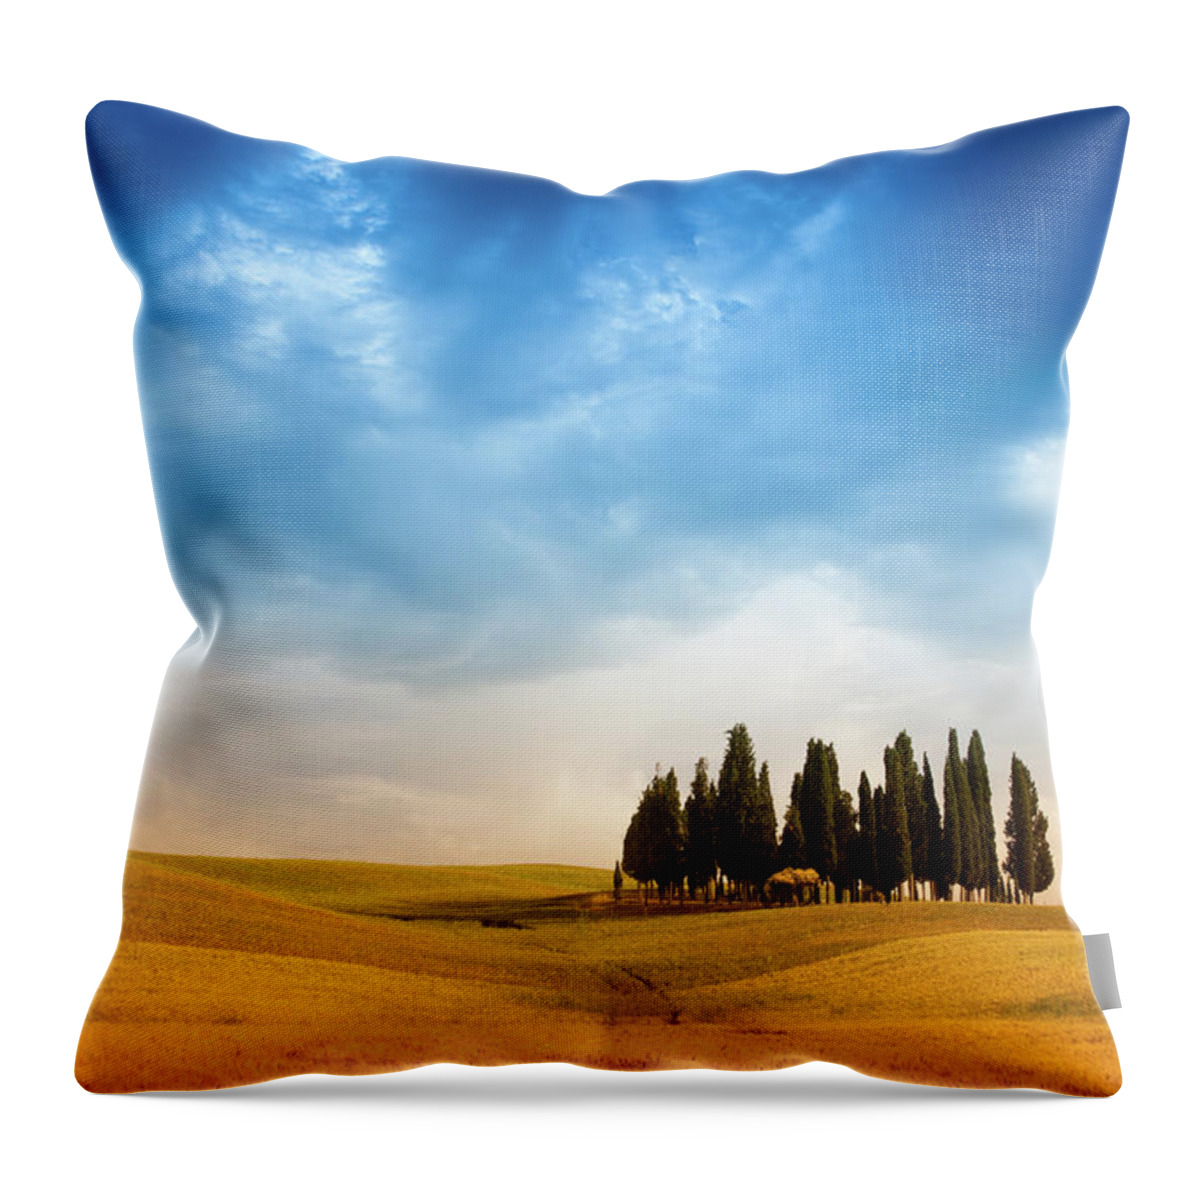 Outdoors Throw Pillow featuring the photograph Cypress Trees In Wheat Field Of Tuscany by Michele Berti